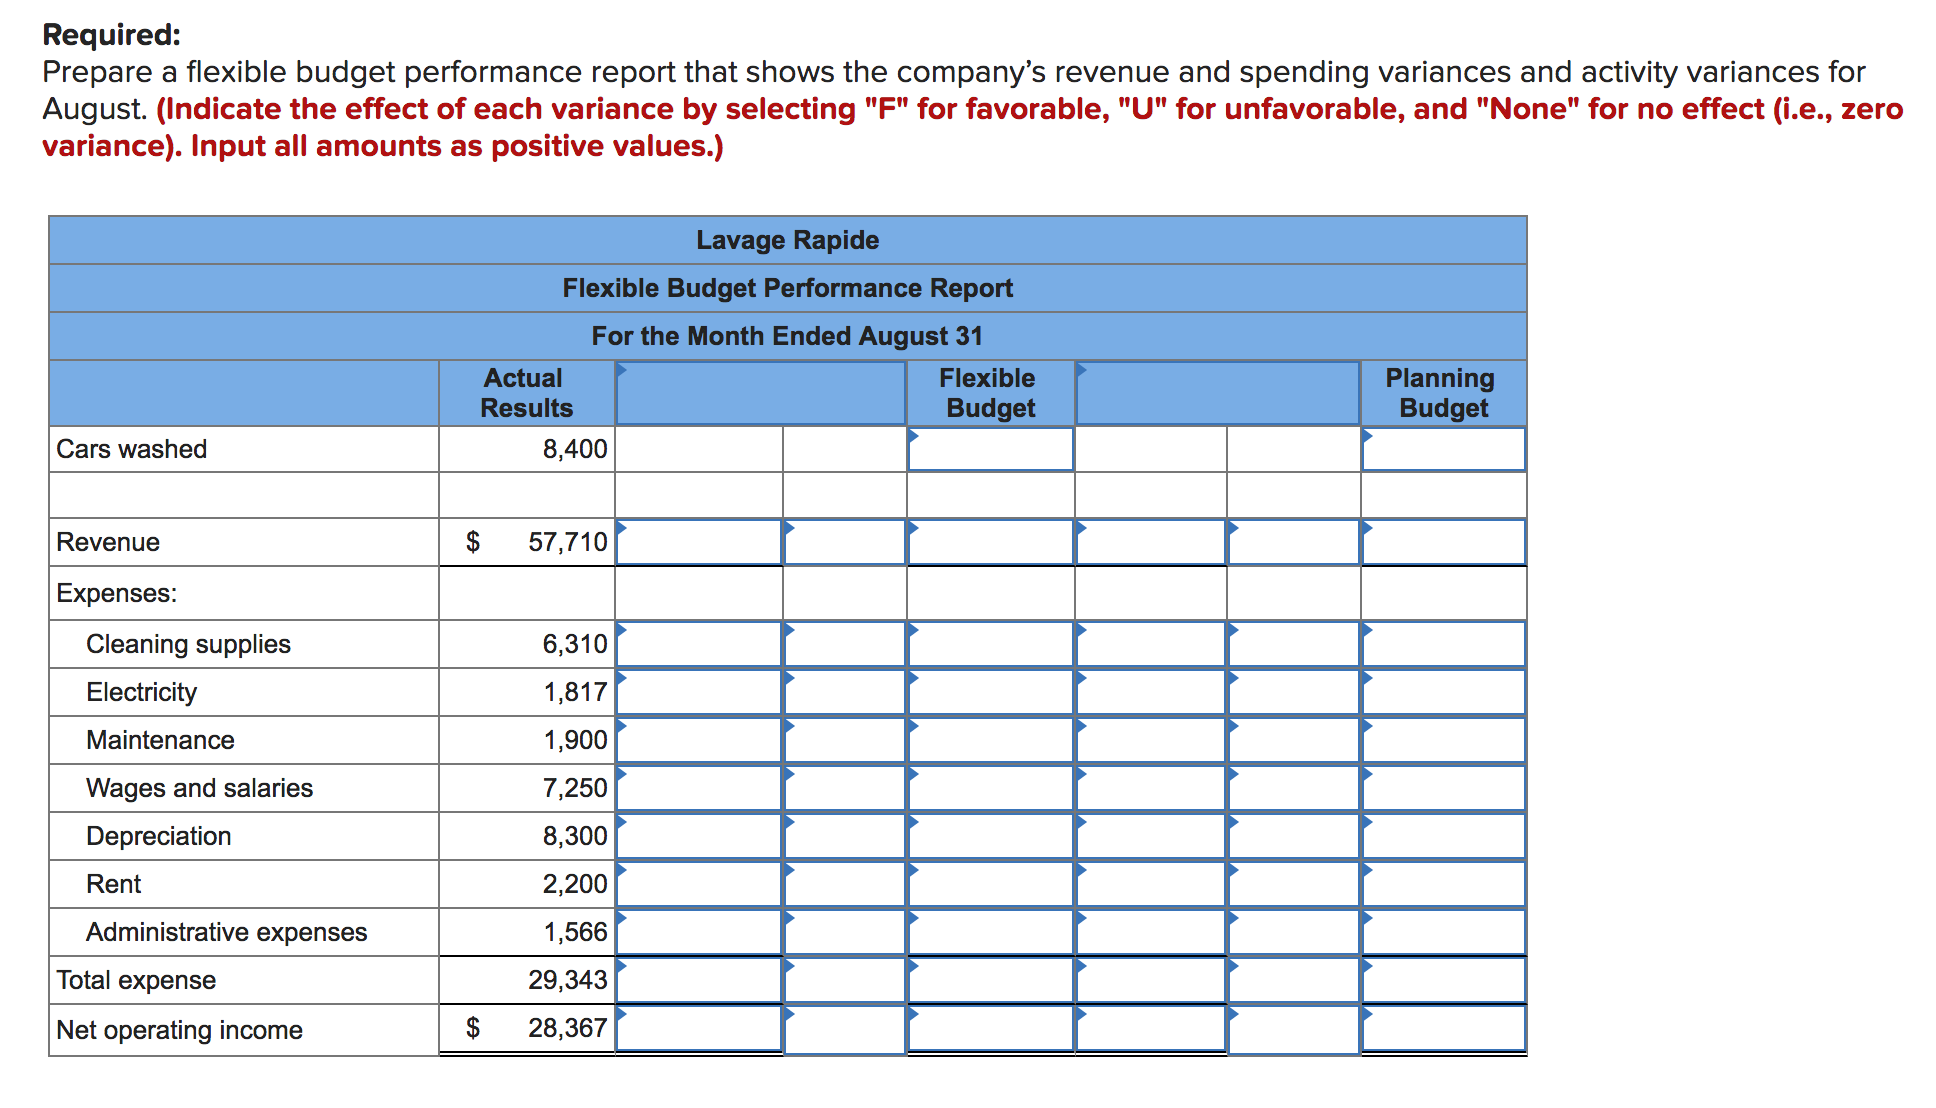 Required:
Prepare a flexible budget performance report that shows the company's revenue and spending variances and activity variances for
August. (Indicate the effect of each variance by selecting "F" for favorable, "U" for unfavorable, and "None" for no effect (i.e., zero
variance). Input all amounts as positive values.)
Lavage Rapide
Flexible Budget Performance Report
For the Month Ended August 31
Planning
Budget
Actual
Flexible
Results
Budget
Cars washed
8,400
Revenue
$ 57,710
Expenses:
Cleaning supplies
6,310
Electricity
1,817
Maintenance
1,900
Wages and salaries
7,250
Depreciation
8,300
Rent
2,200
Administrative expenses
1,566
Total expense
29,343
Net operating income
28,367
